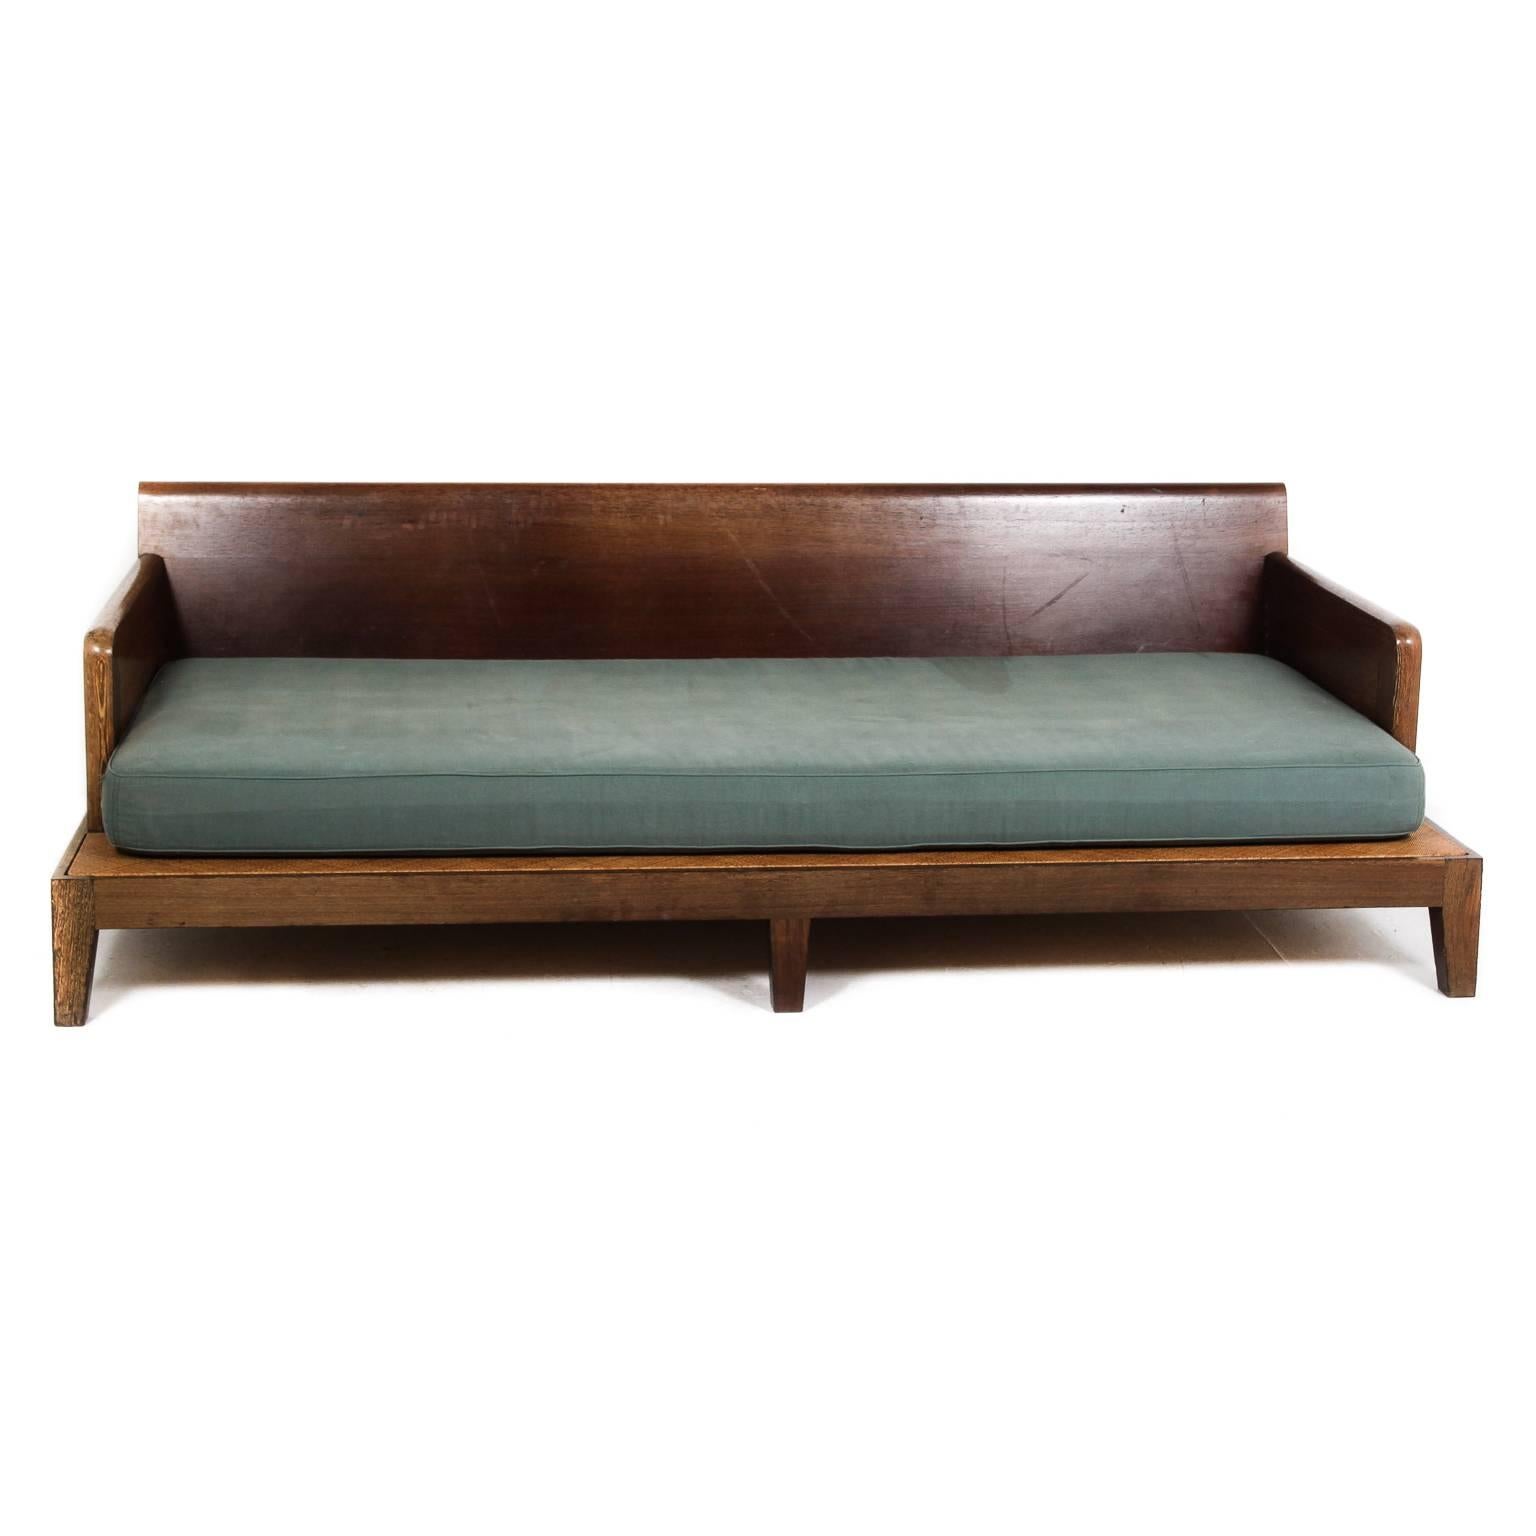 A fabulous example from one of the top French designers in the world today, An original, circa 1980, ‘opium bed’ by Christian Liagre. Liagre is world renowned for his simple design and elegant lines. This piece is from his early works and is